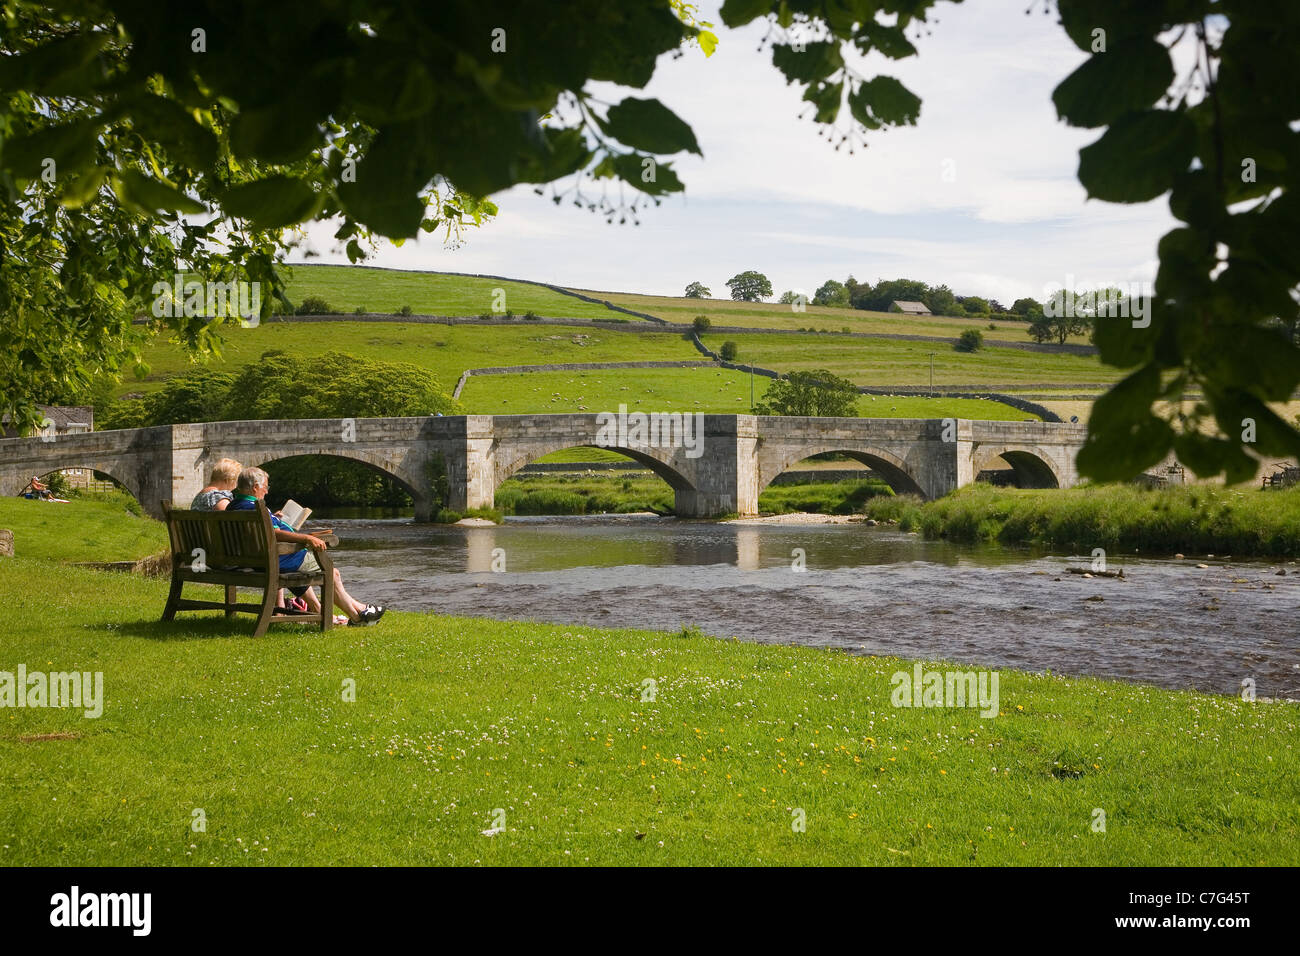 The five-arched bridge at Burnsall, Lower Wharfedale in Yorkshire and the river Wharfe. Stock Photo